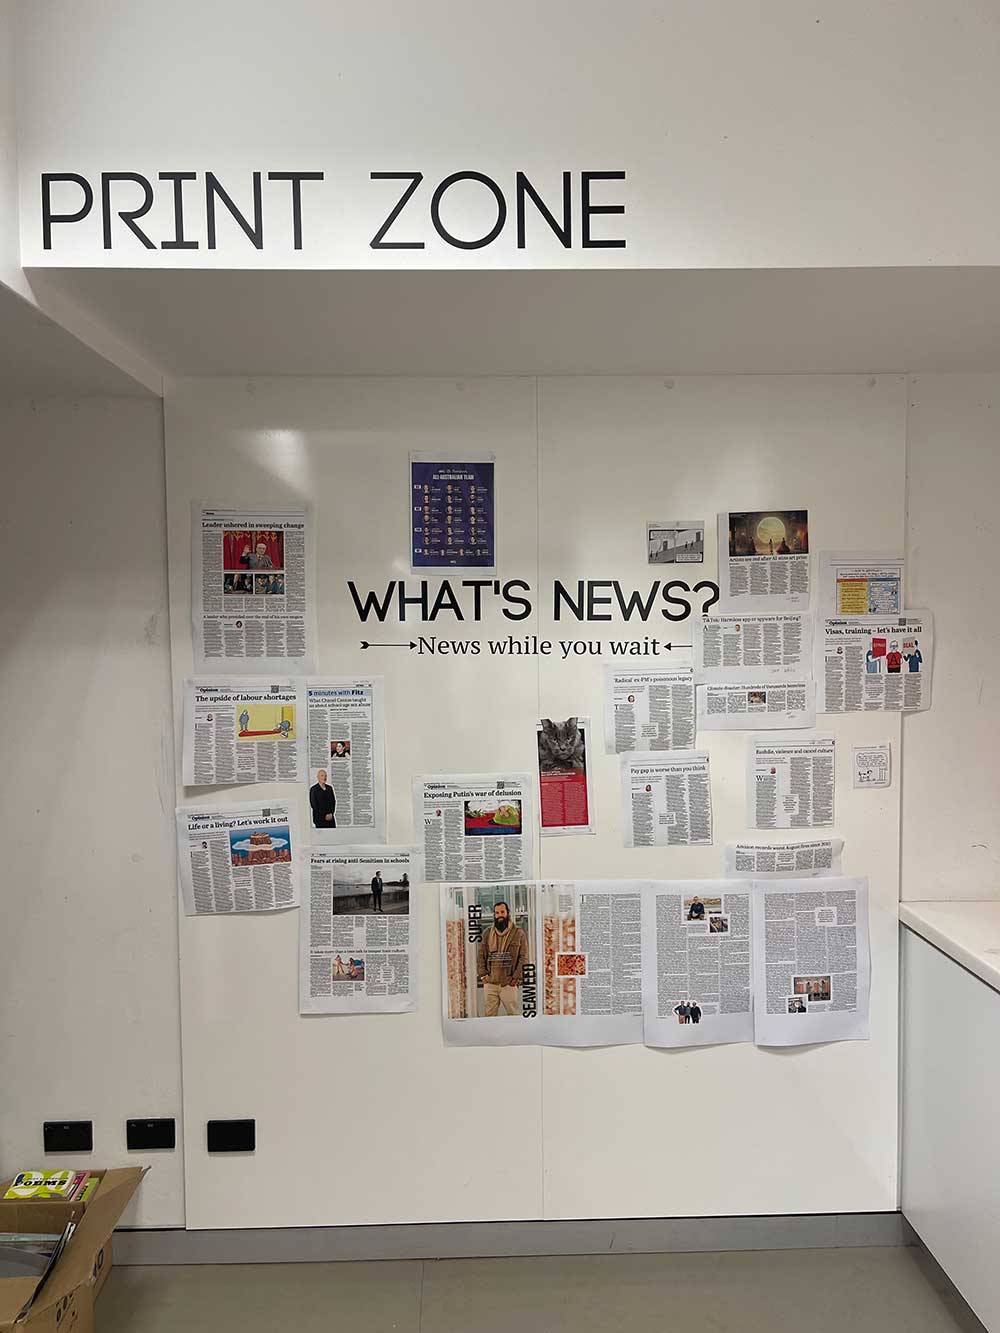 'What's News?' wall in the Print Zone of the Arthur Holt Library